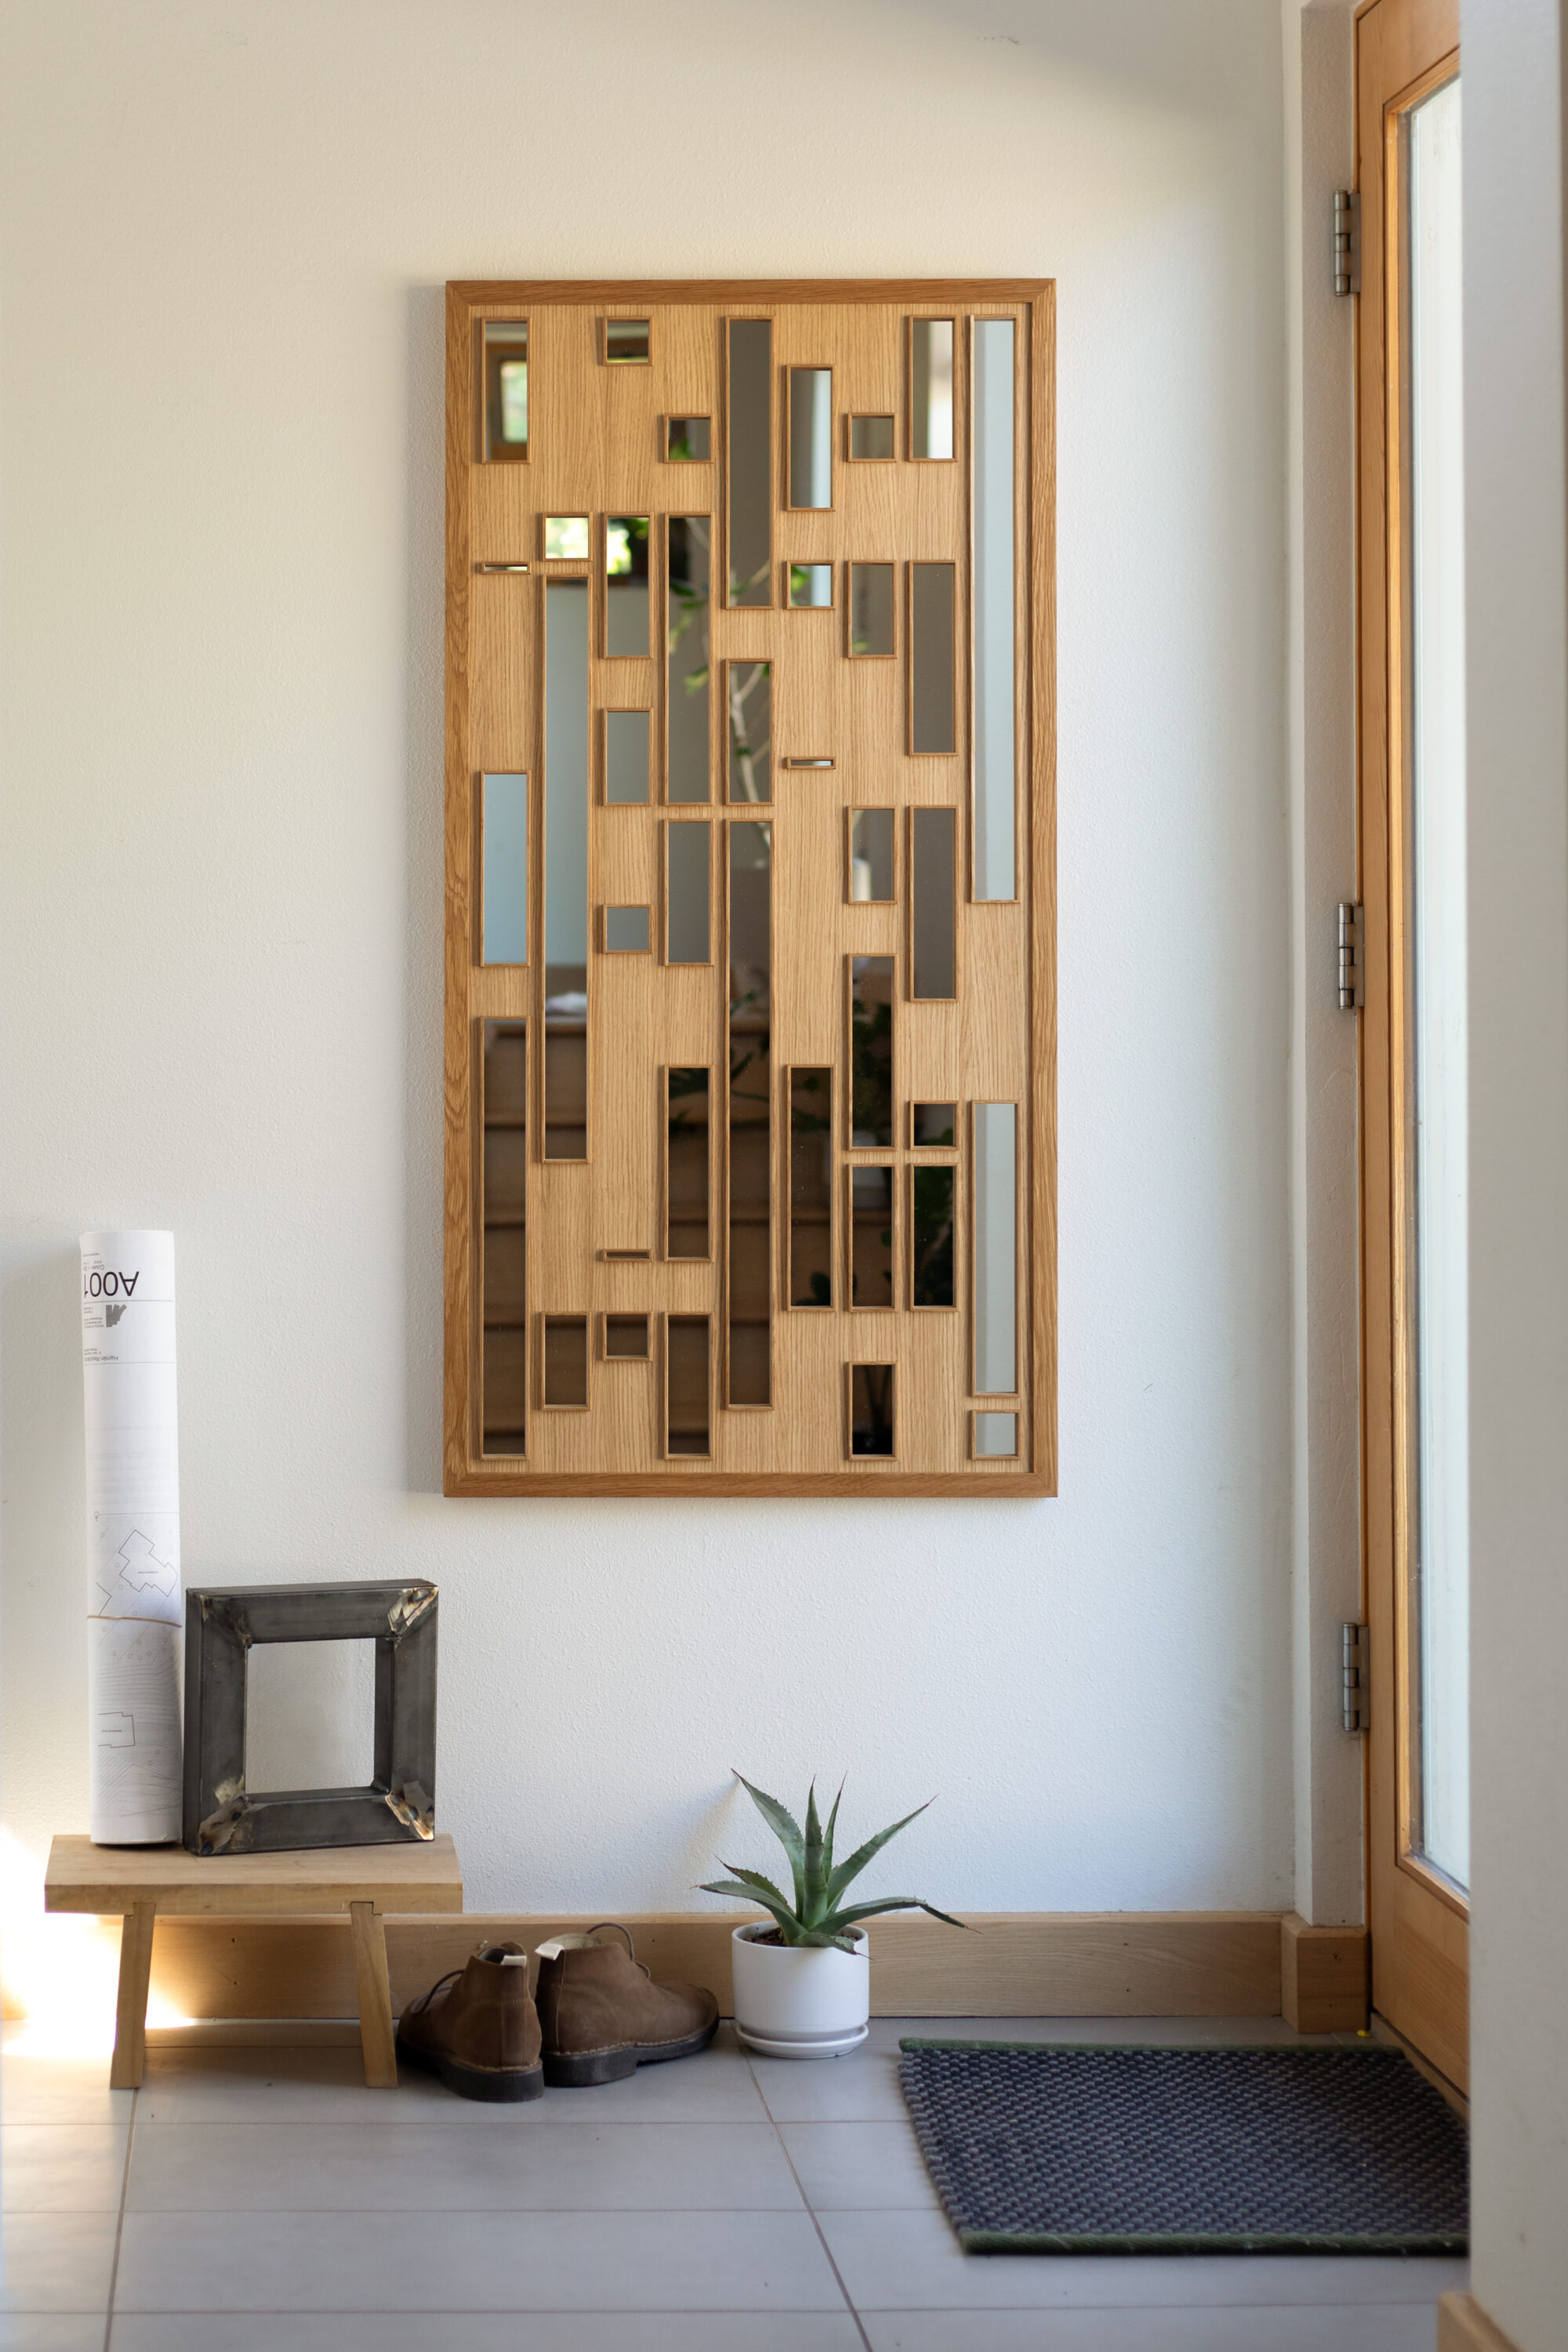 an entryway to a house. next to the door is a tall mirror with a wooden framing and various lengths of rectangular cutouts that show mirror through the framing.